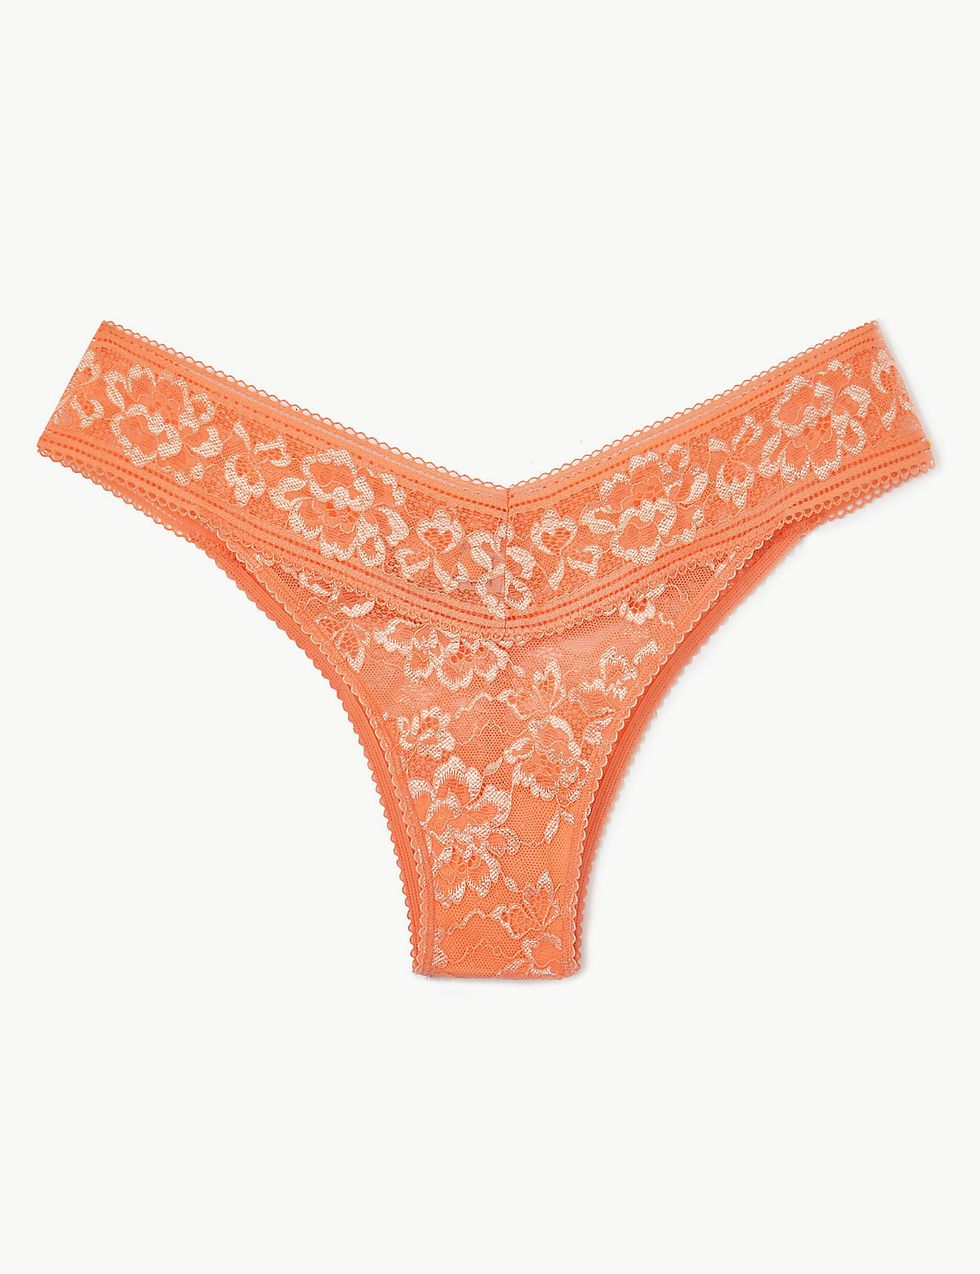  M&S: All Knickers